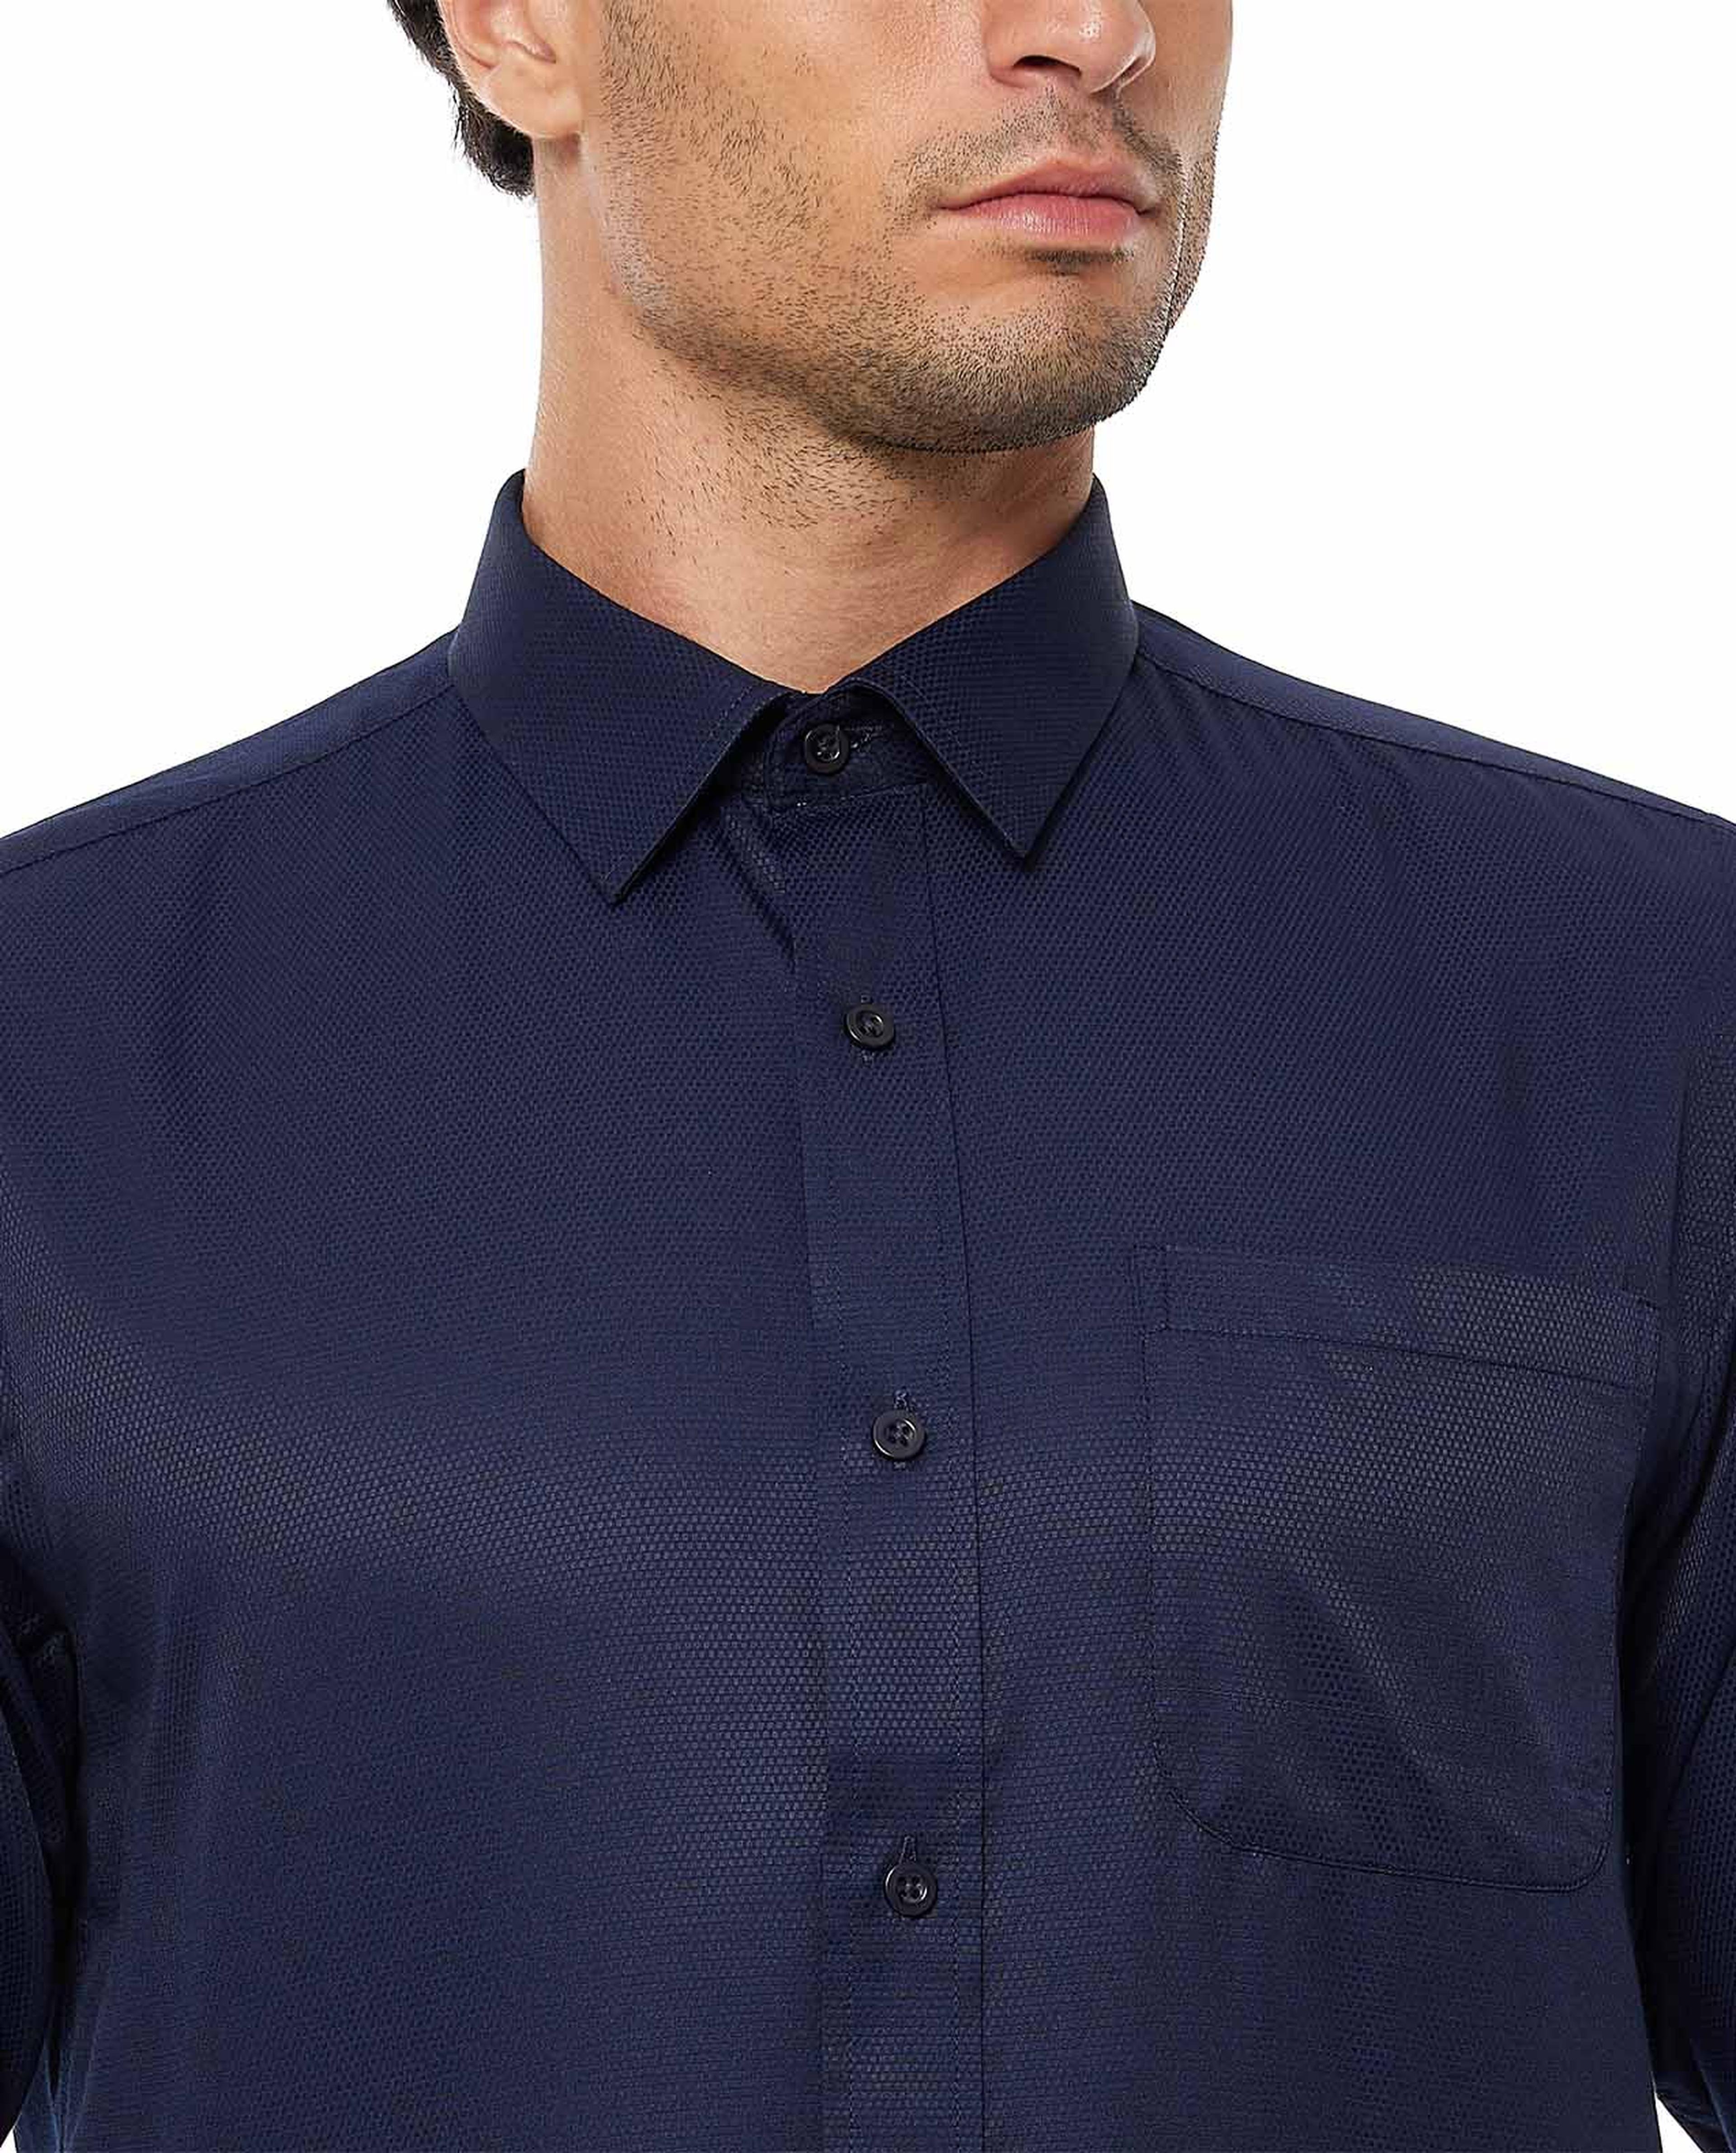 Solid Shirt with Classic Collar and Long Sleeves